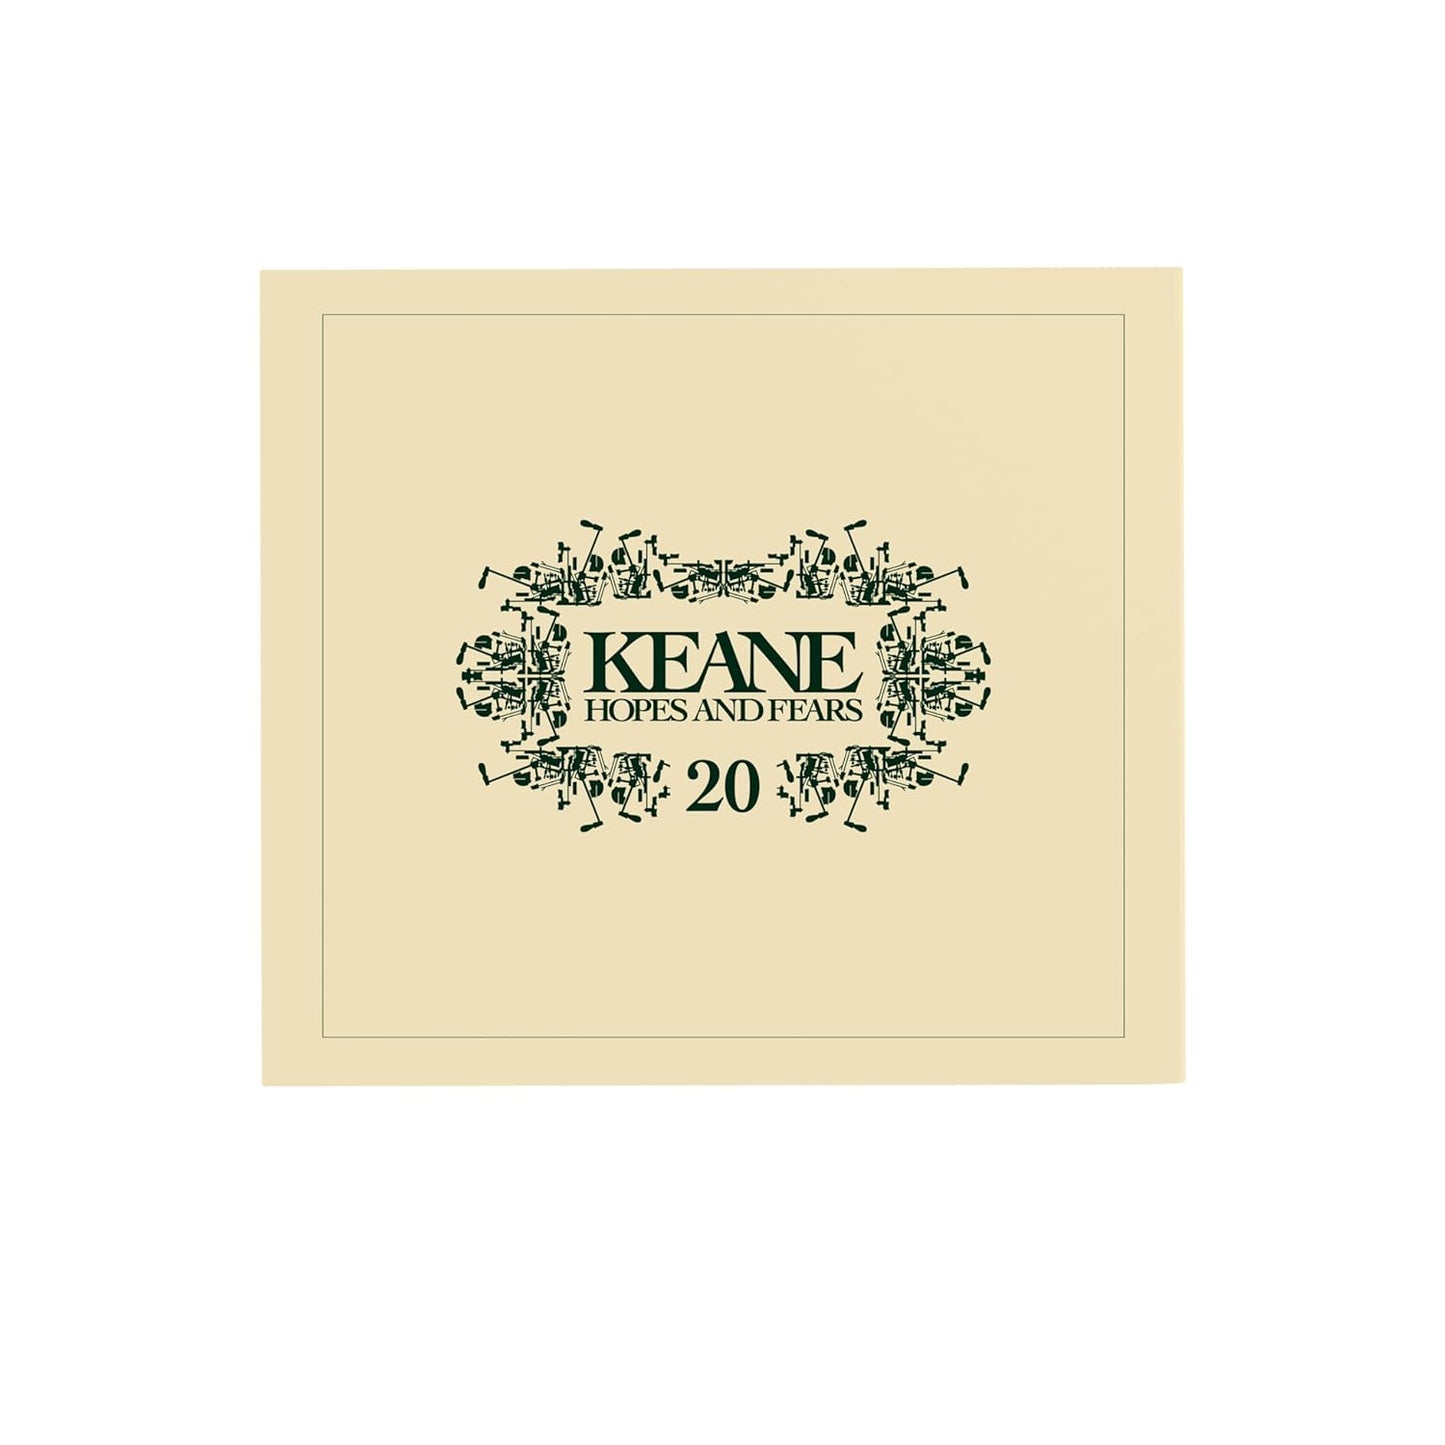 Keane / Hopes and Fears 20th anniversary 3CD deluxe